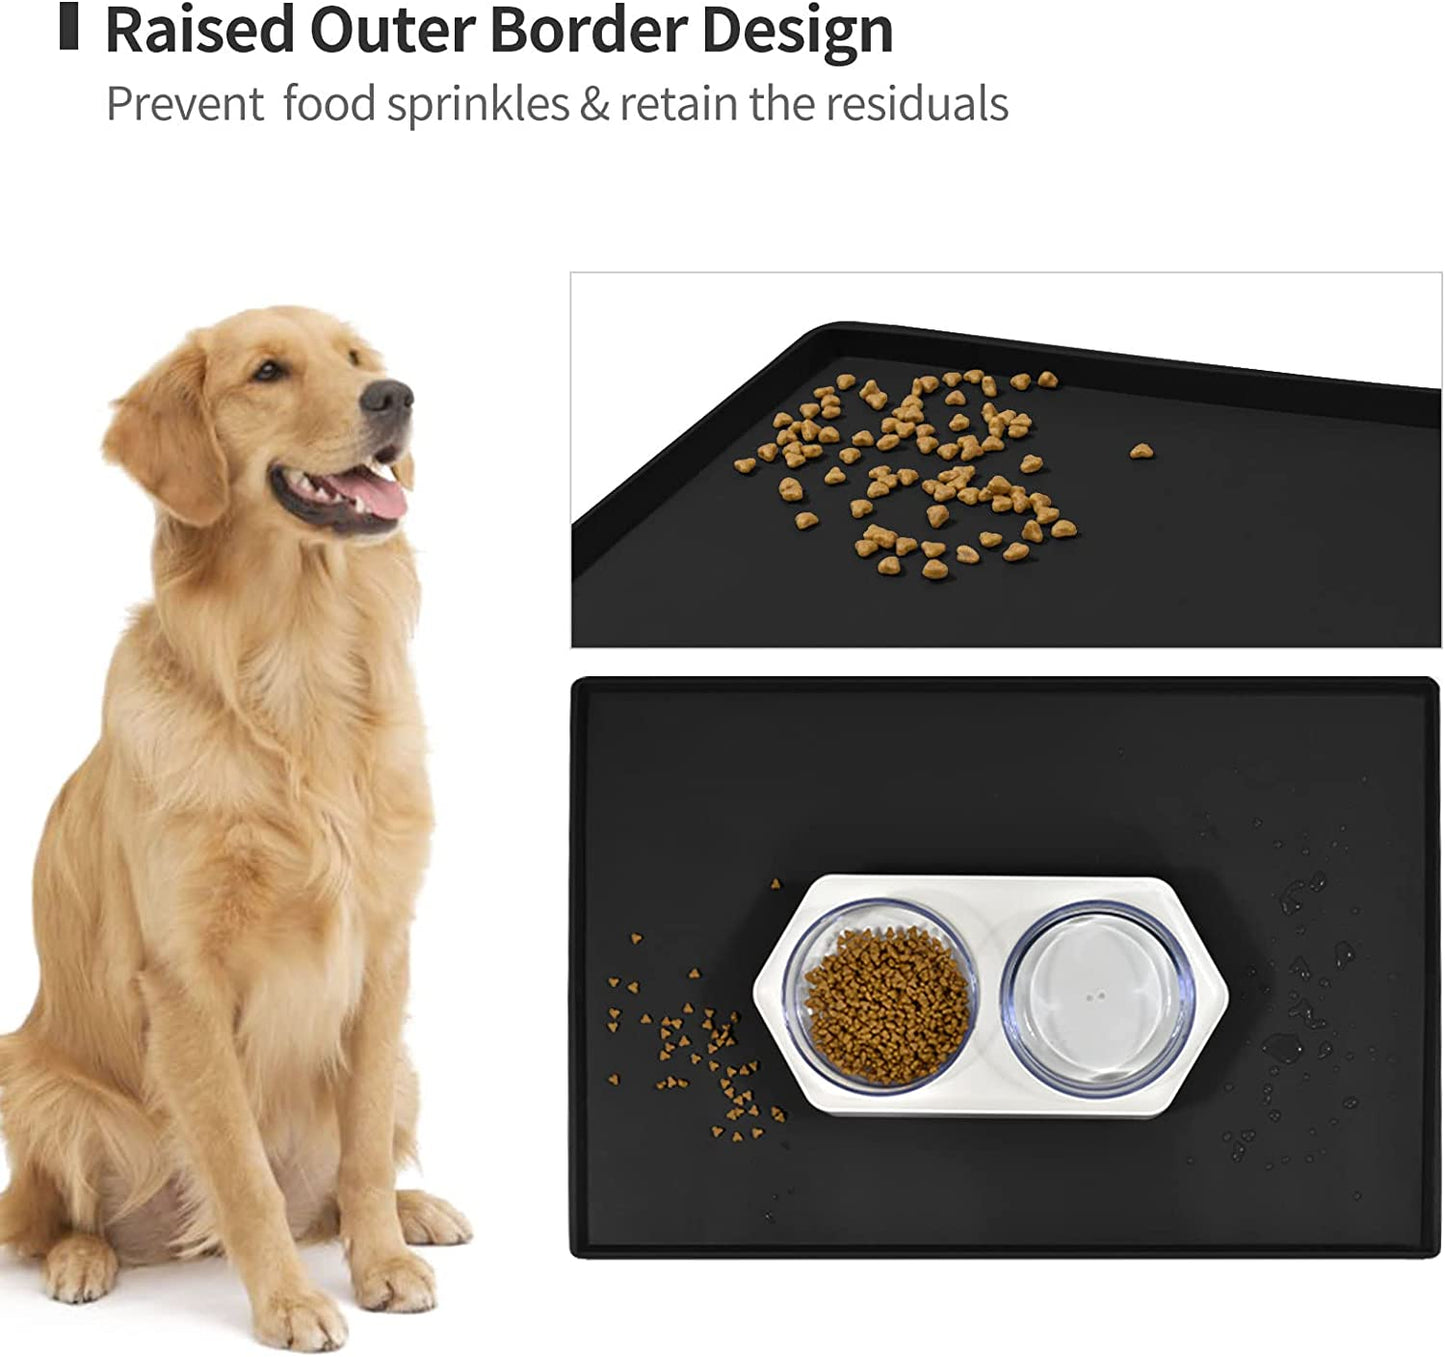 Dog Food Mat,Silicone Waterproof Dog Cat Food Tray,Non Slip Pet Bowl Mats Placemat,Size:(18.5" X 11.5") 0.6",(24" X 16") 0.6",(28" X 18") 0.8",(32" X 24") 1" Raised Edge